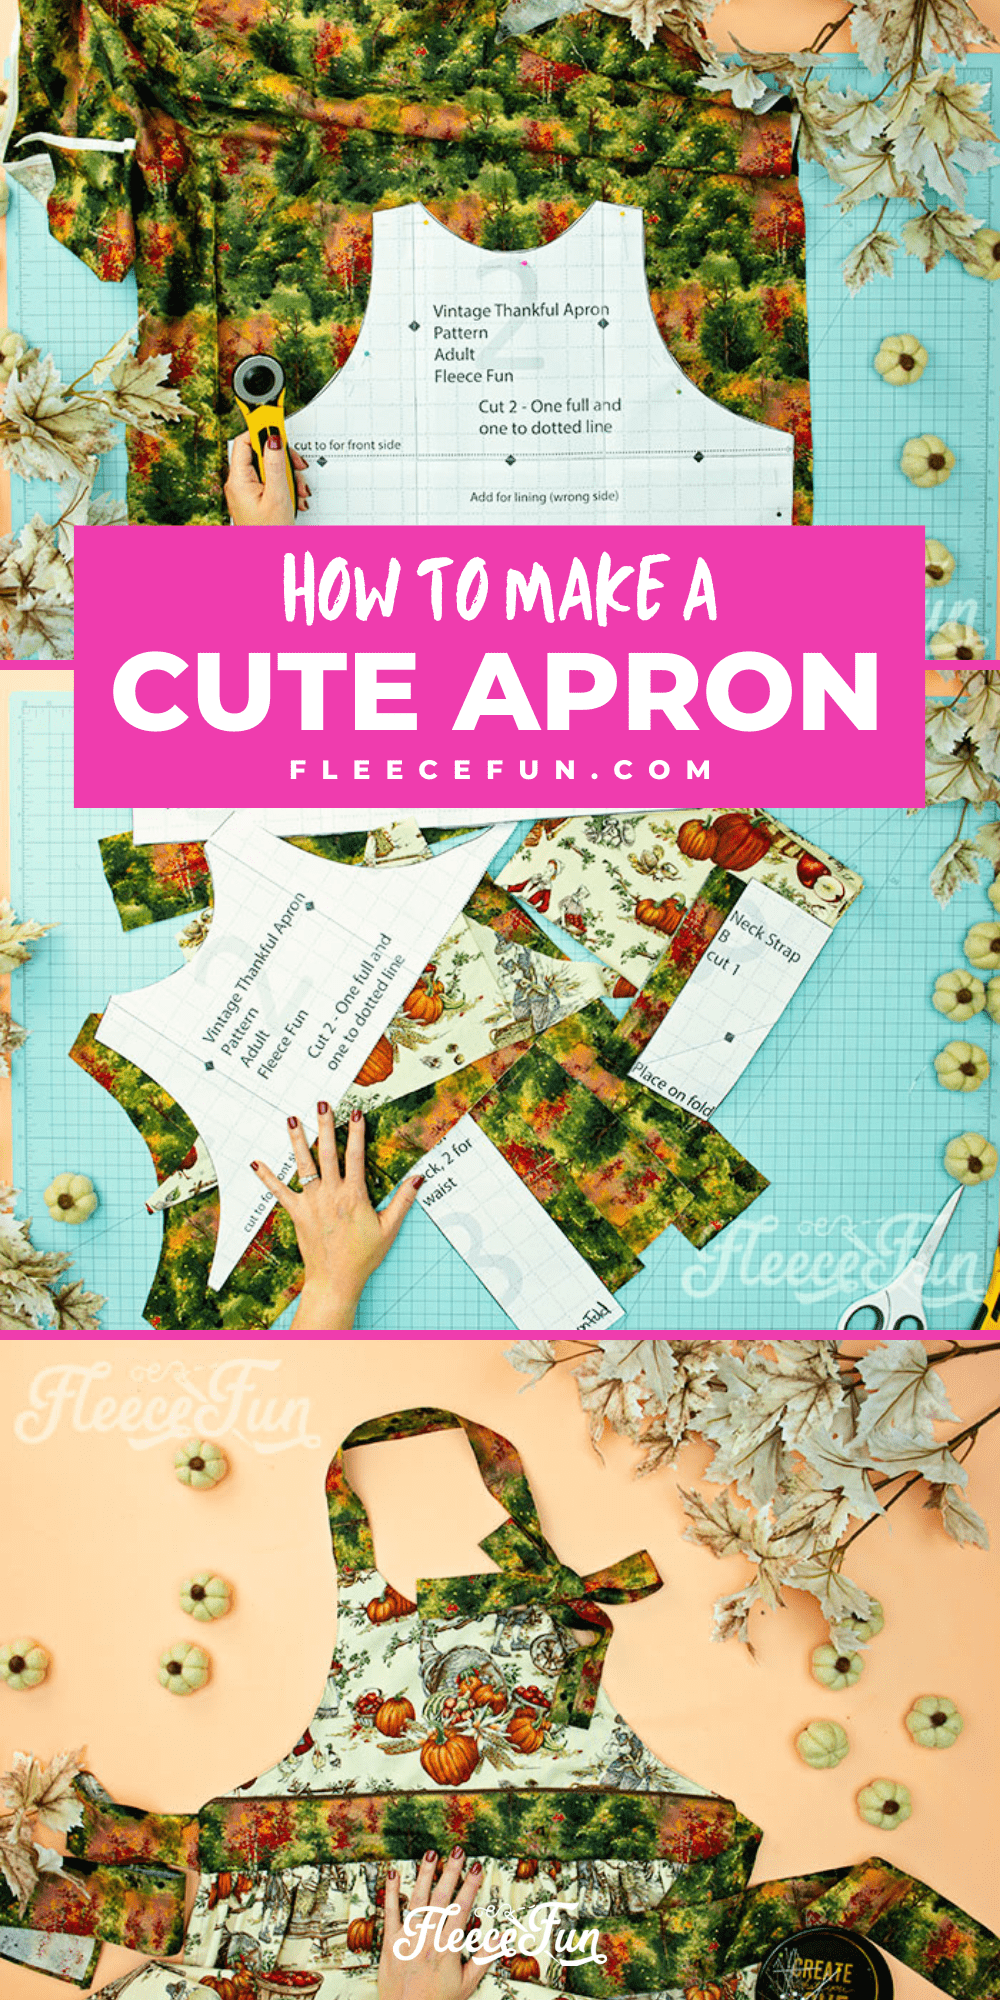 This Free apron pattern and tutorial includeas a pdf pattern and video! Make a vintage style apron that is chic.